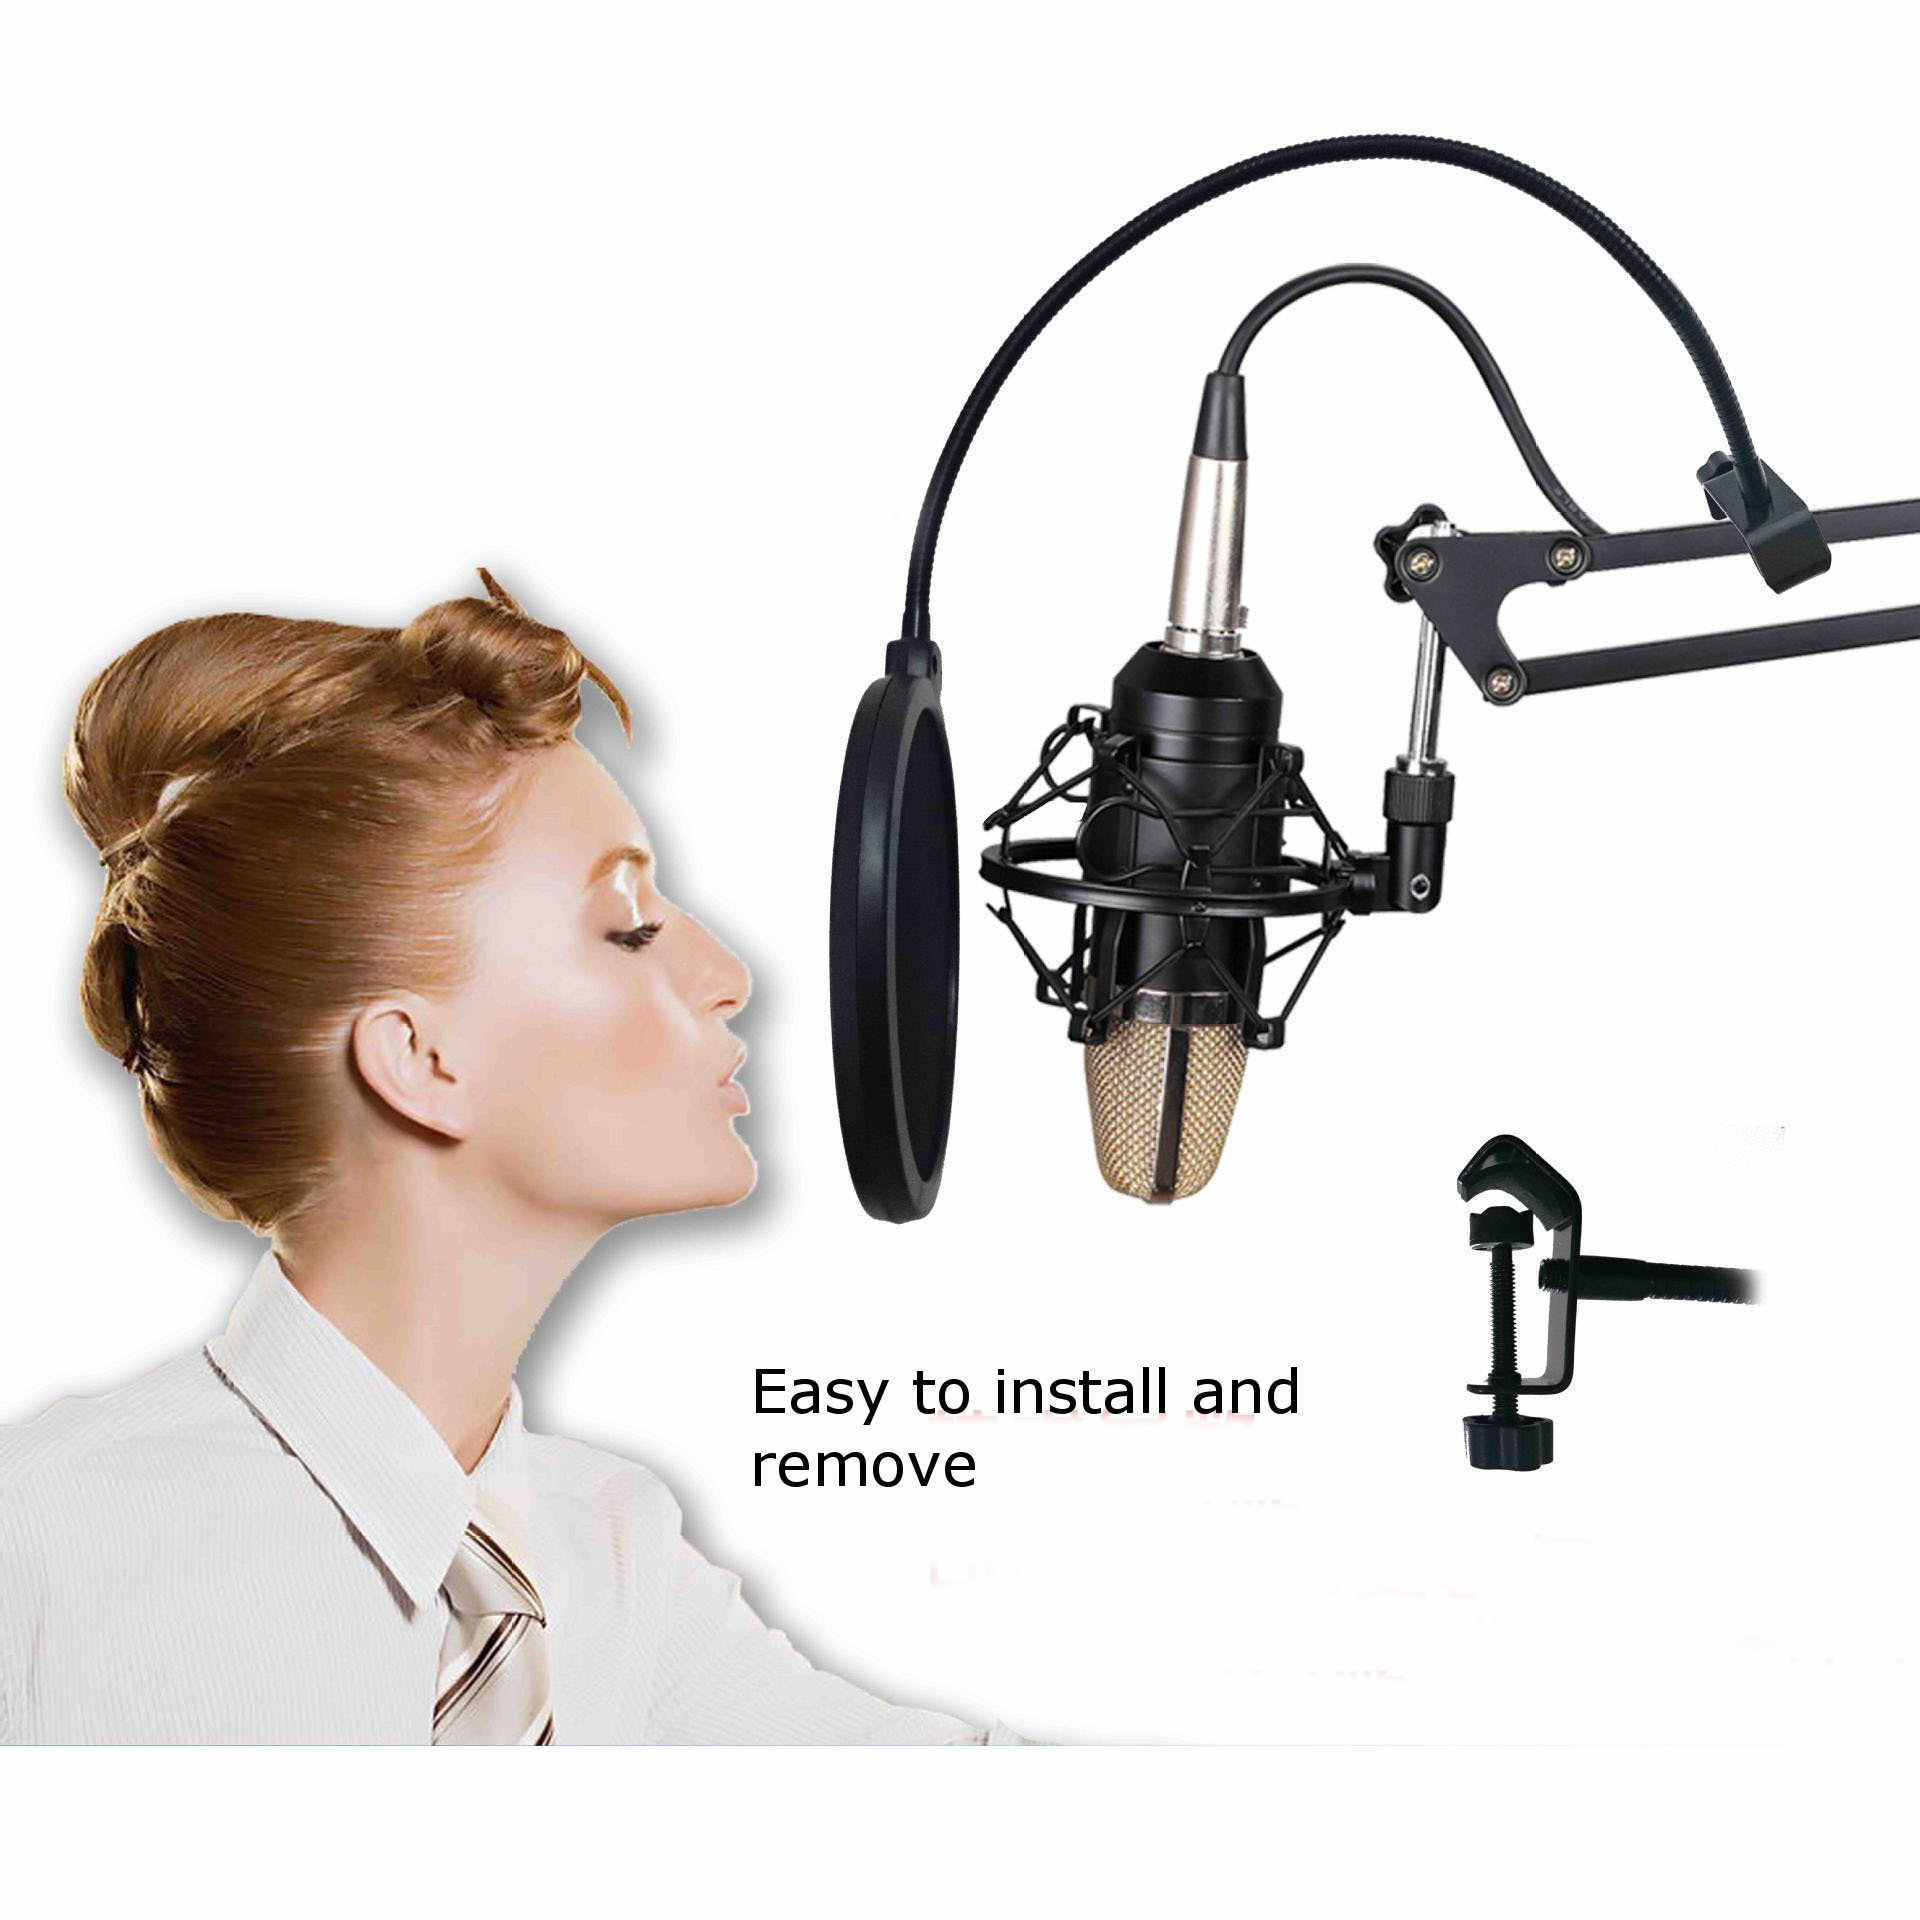 Double-Layer-Studio-Microphone-Mic-Pop-Filter-Wireless-Swivel-Mount-Circular-Shield-For-Recording-1176212